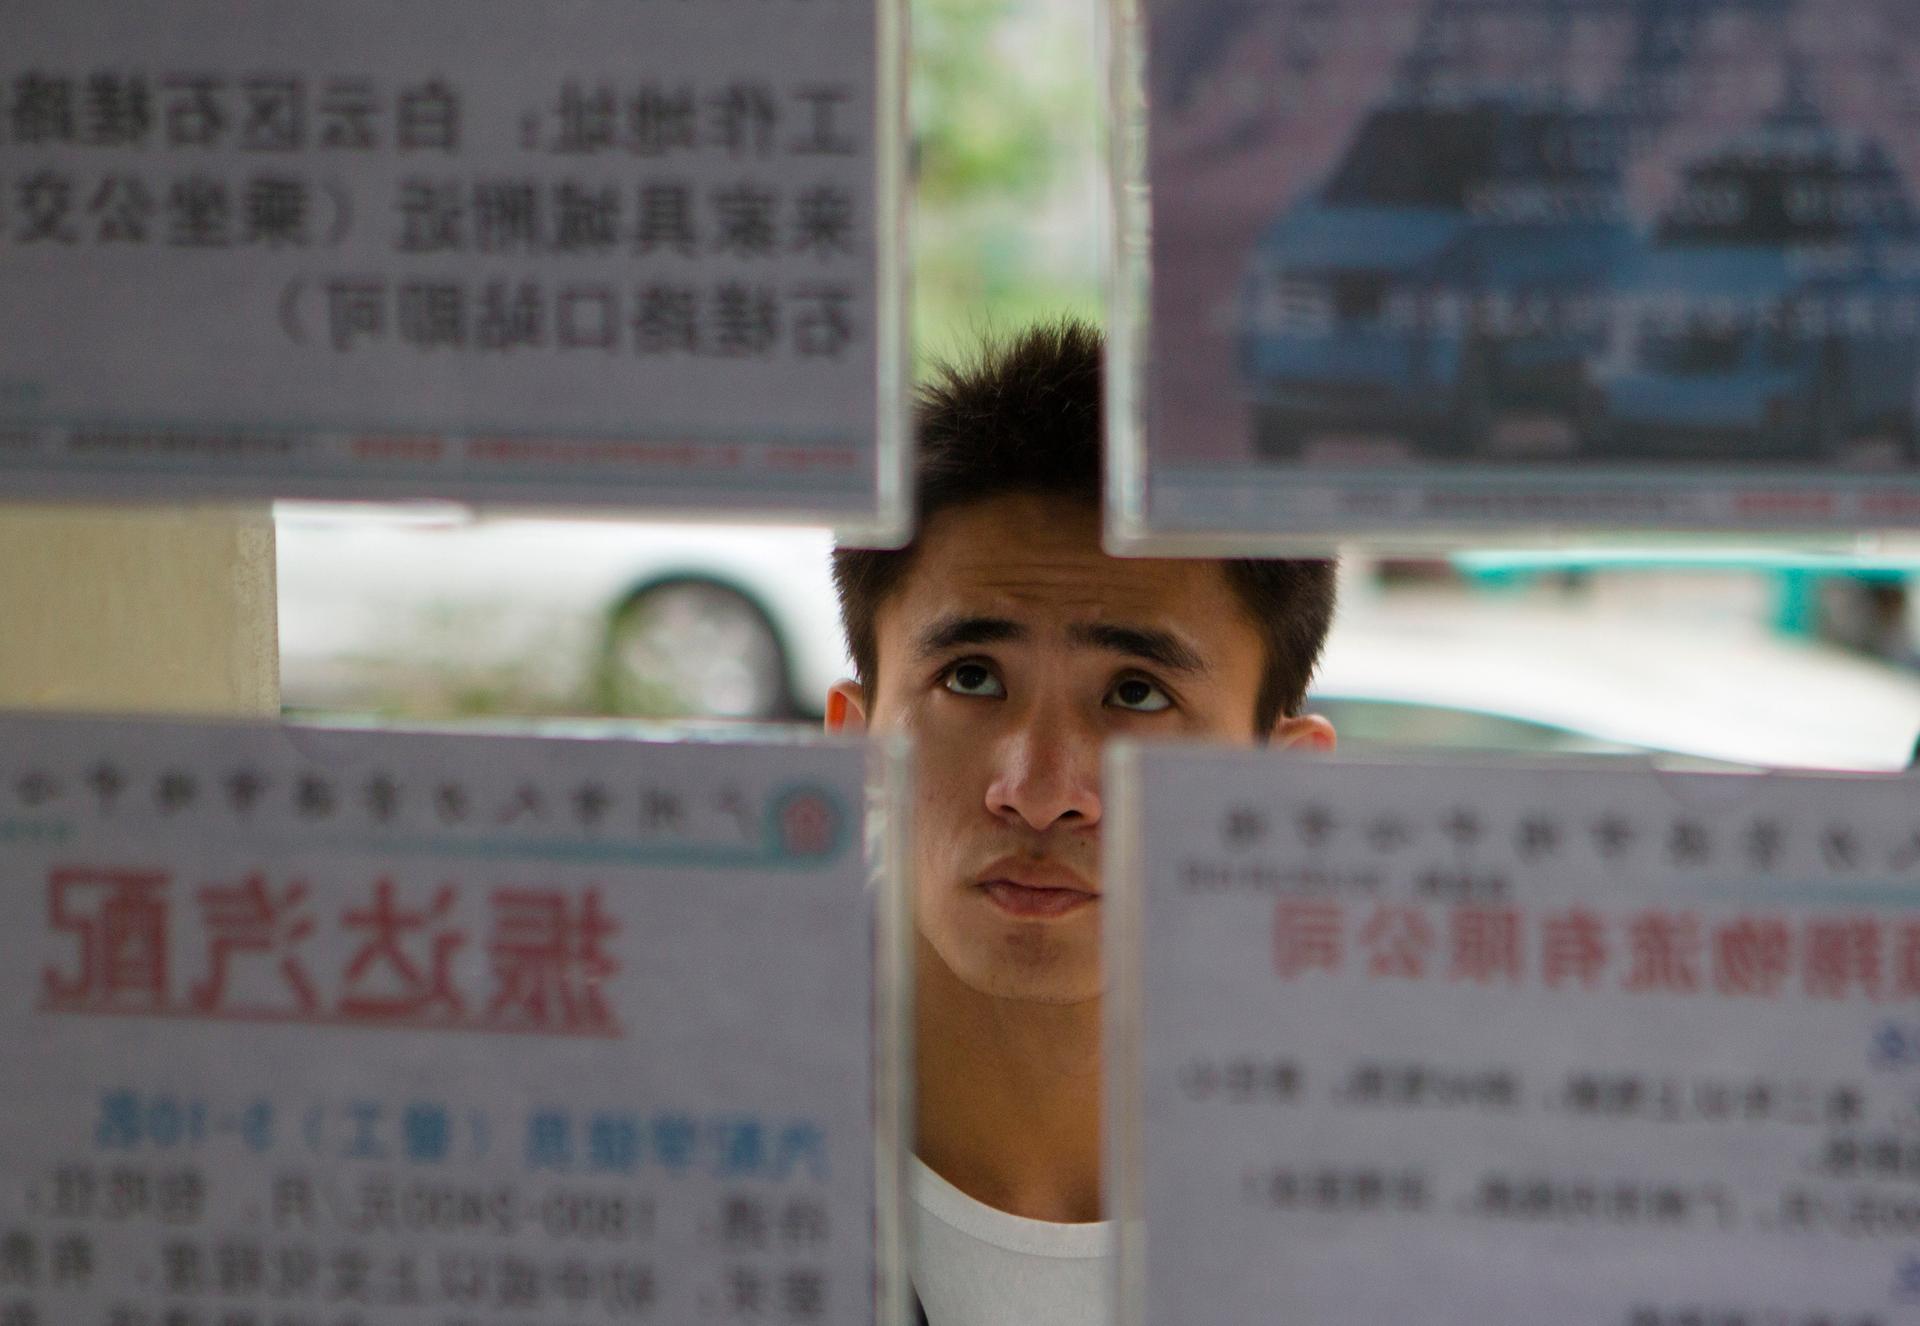 A job seeker looks at recruitment advertisements at a labor market in Guangdong province, where most people speak Cantonese. 